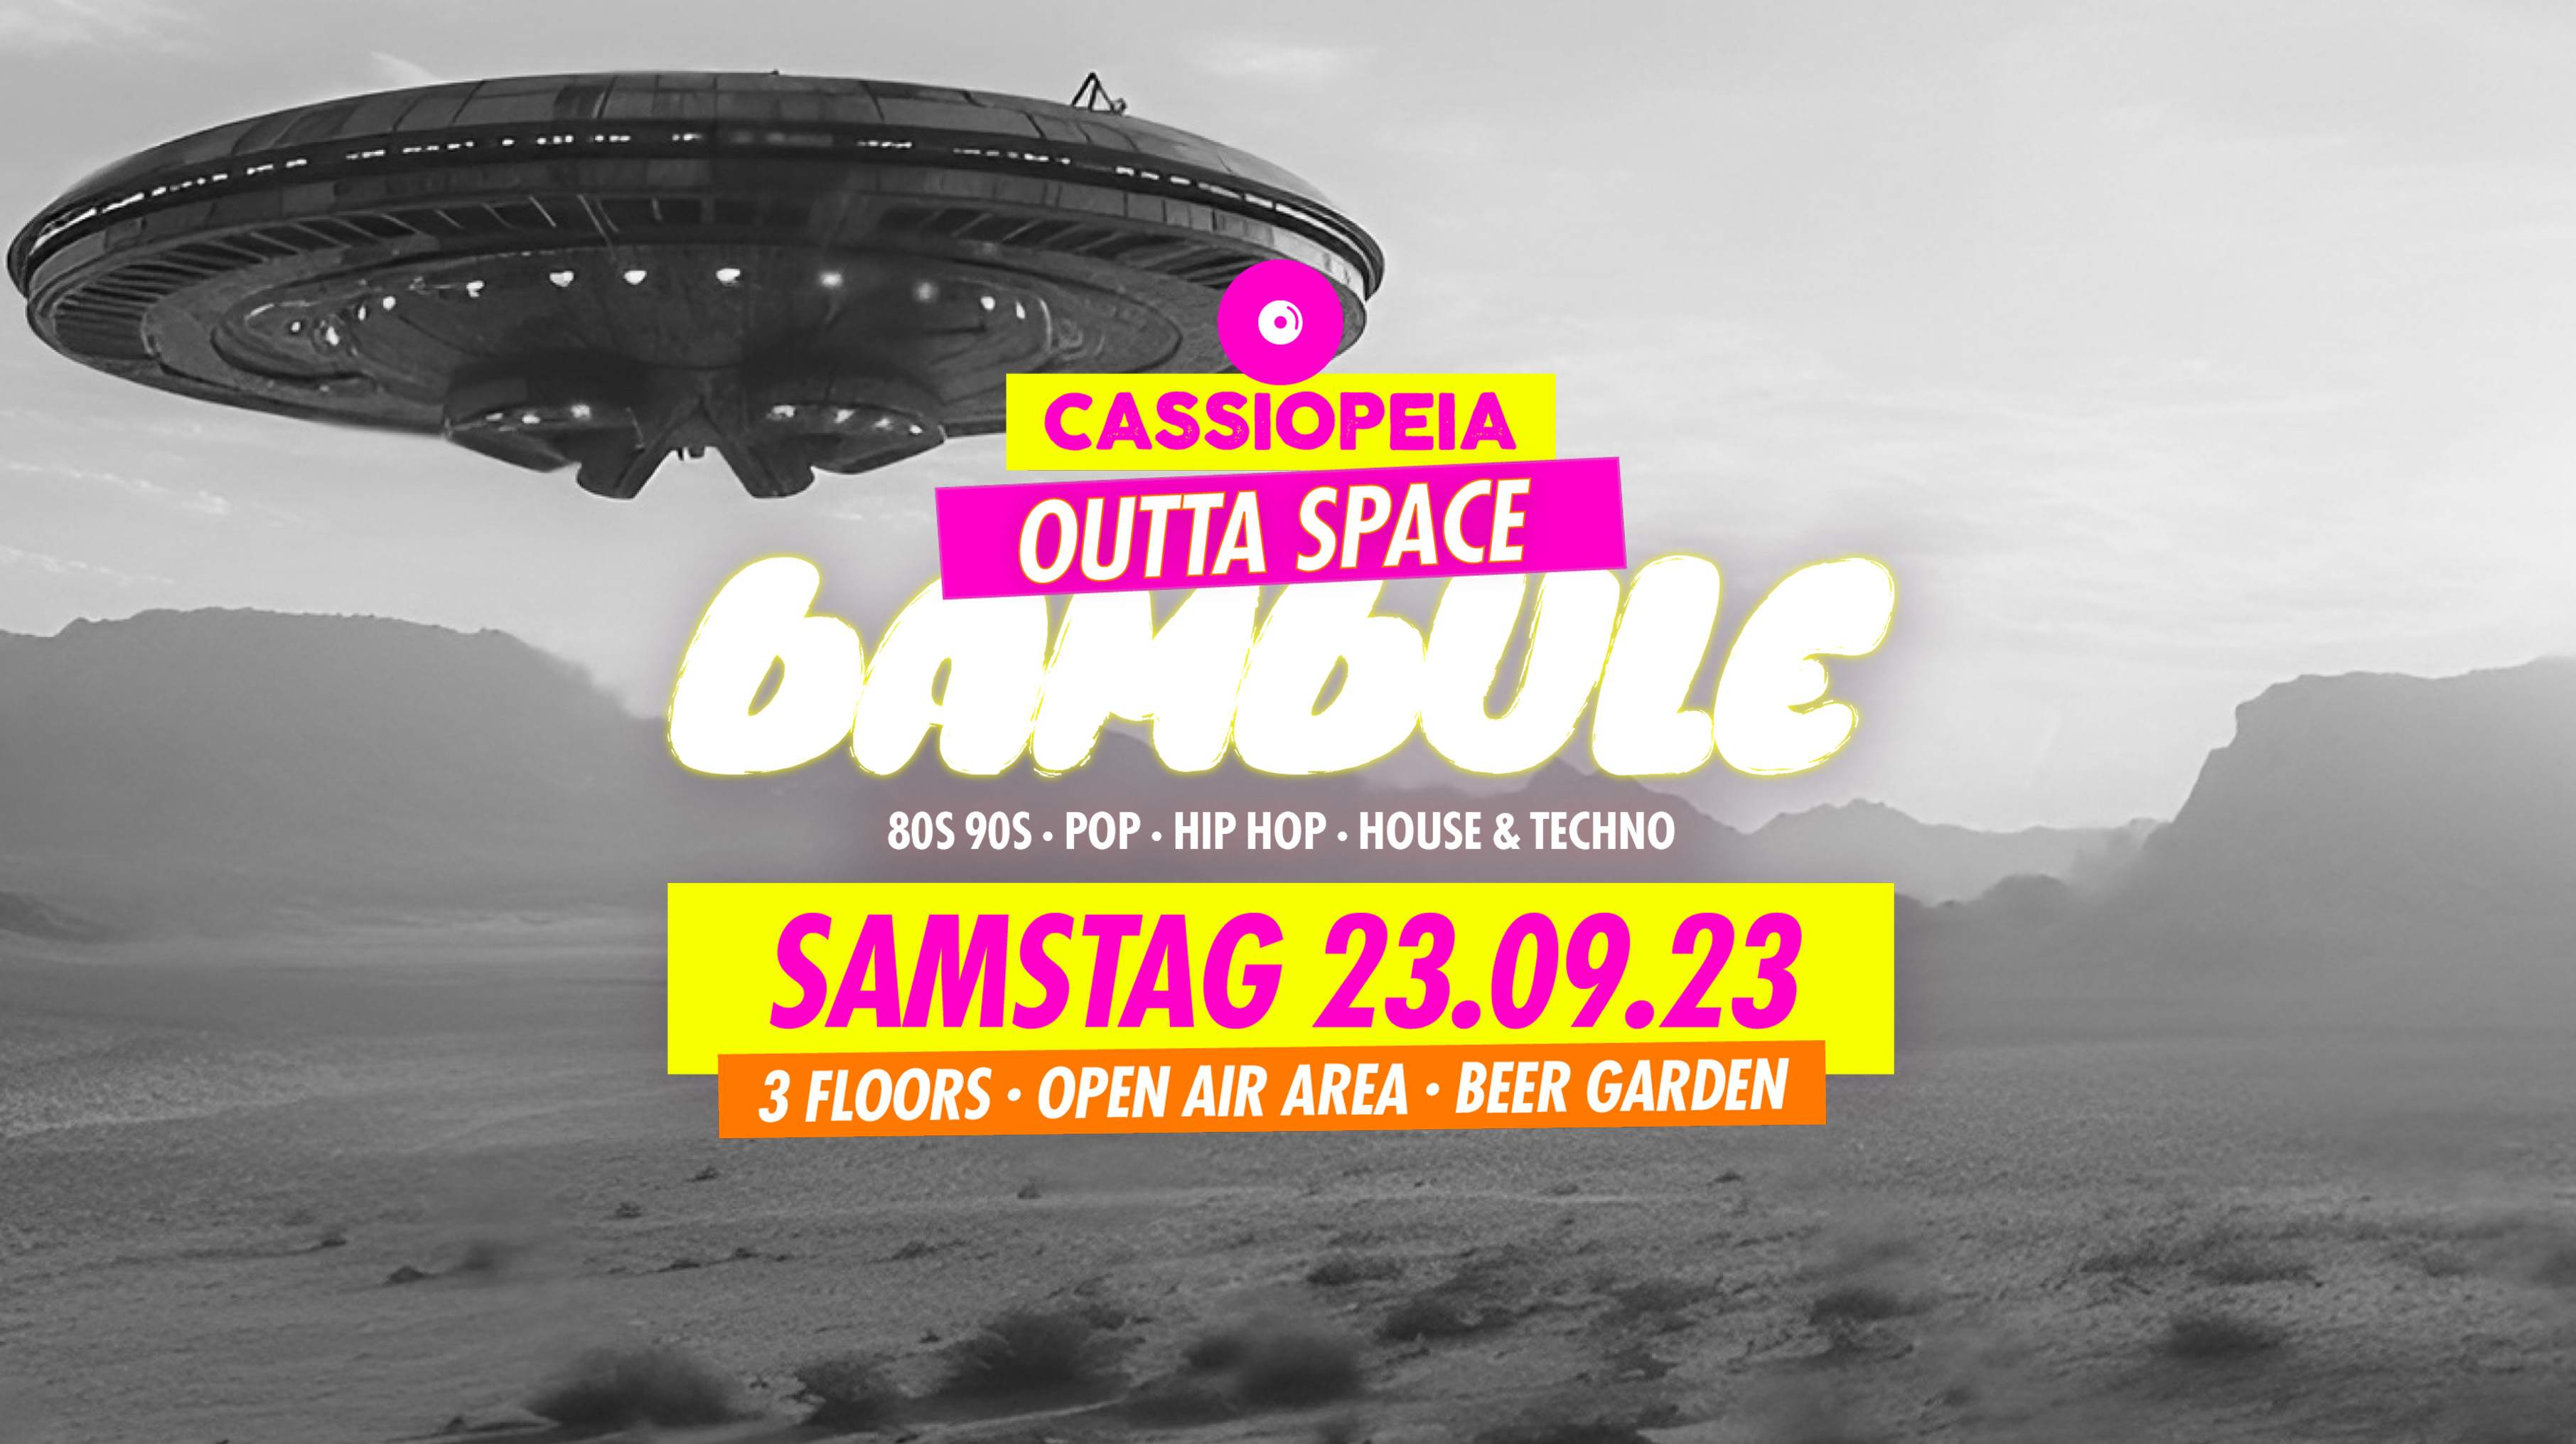 Outta Space Bambule (House & Techno, Hip Hop, 80s, 90s & Pop) - フライヤー表